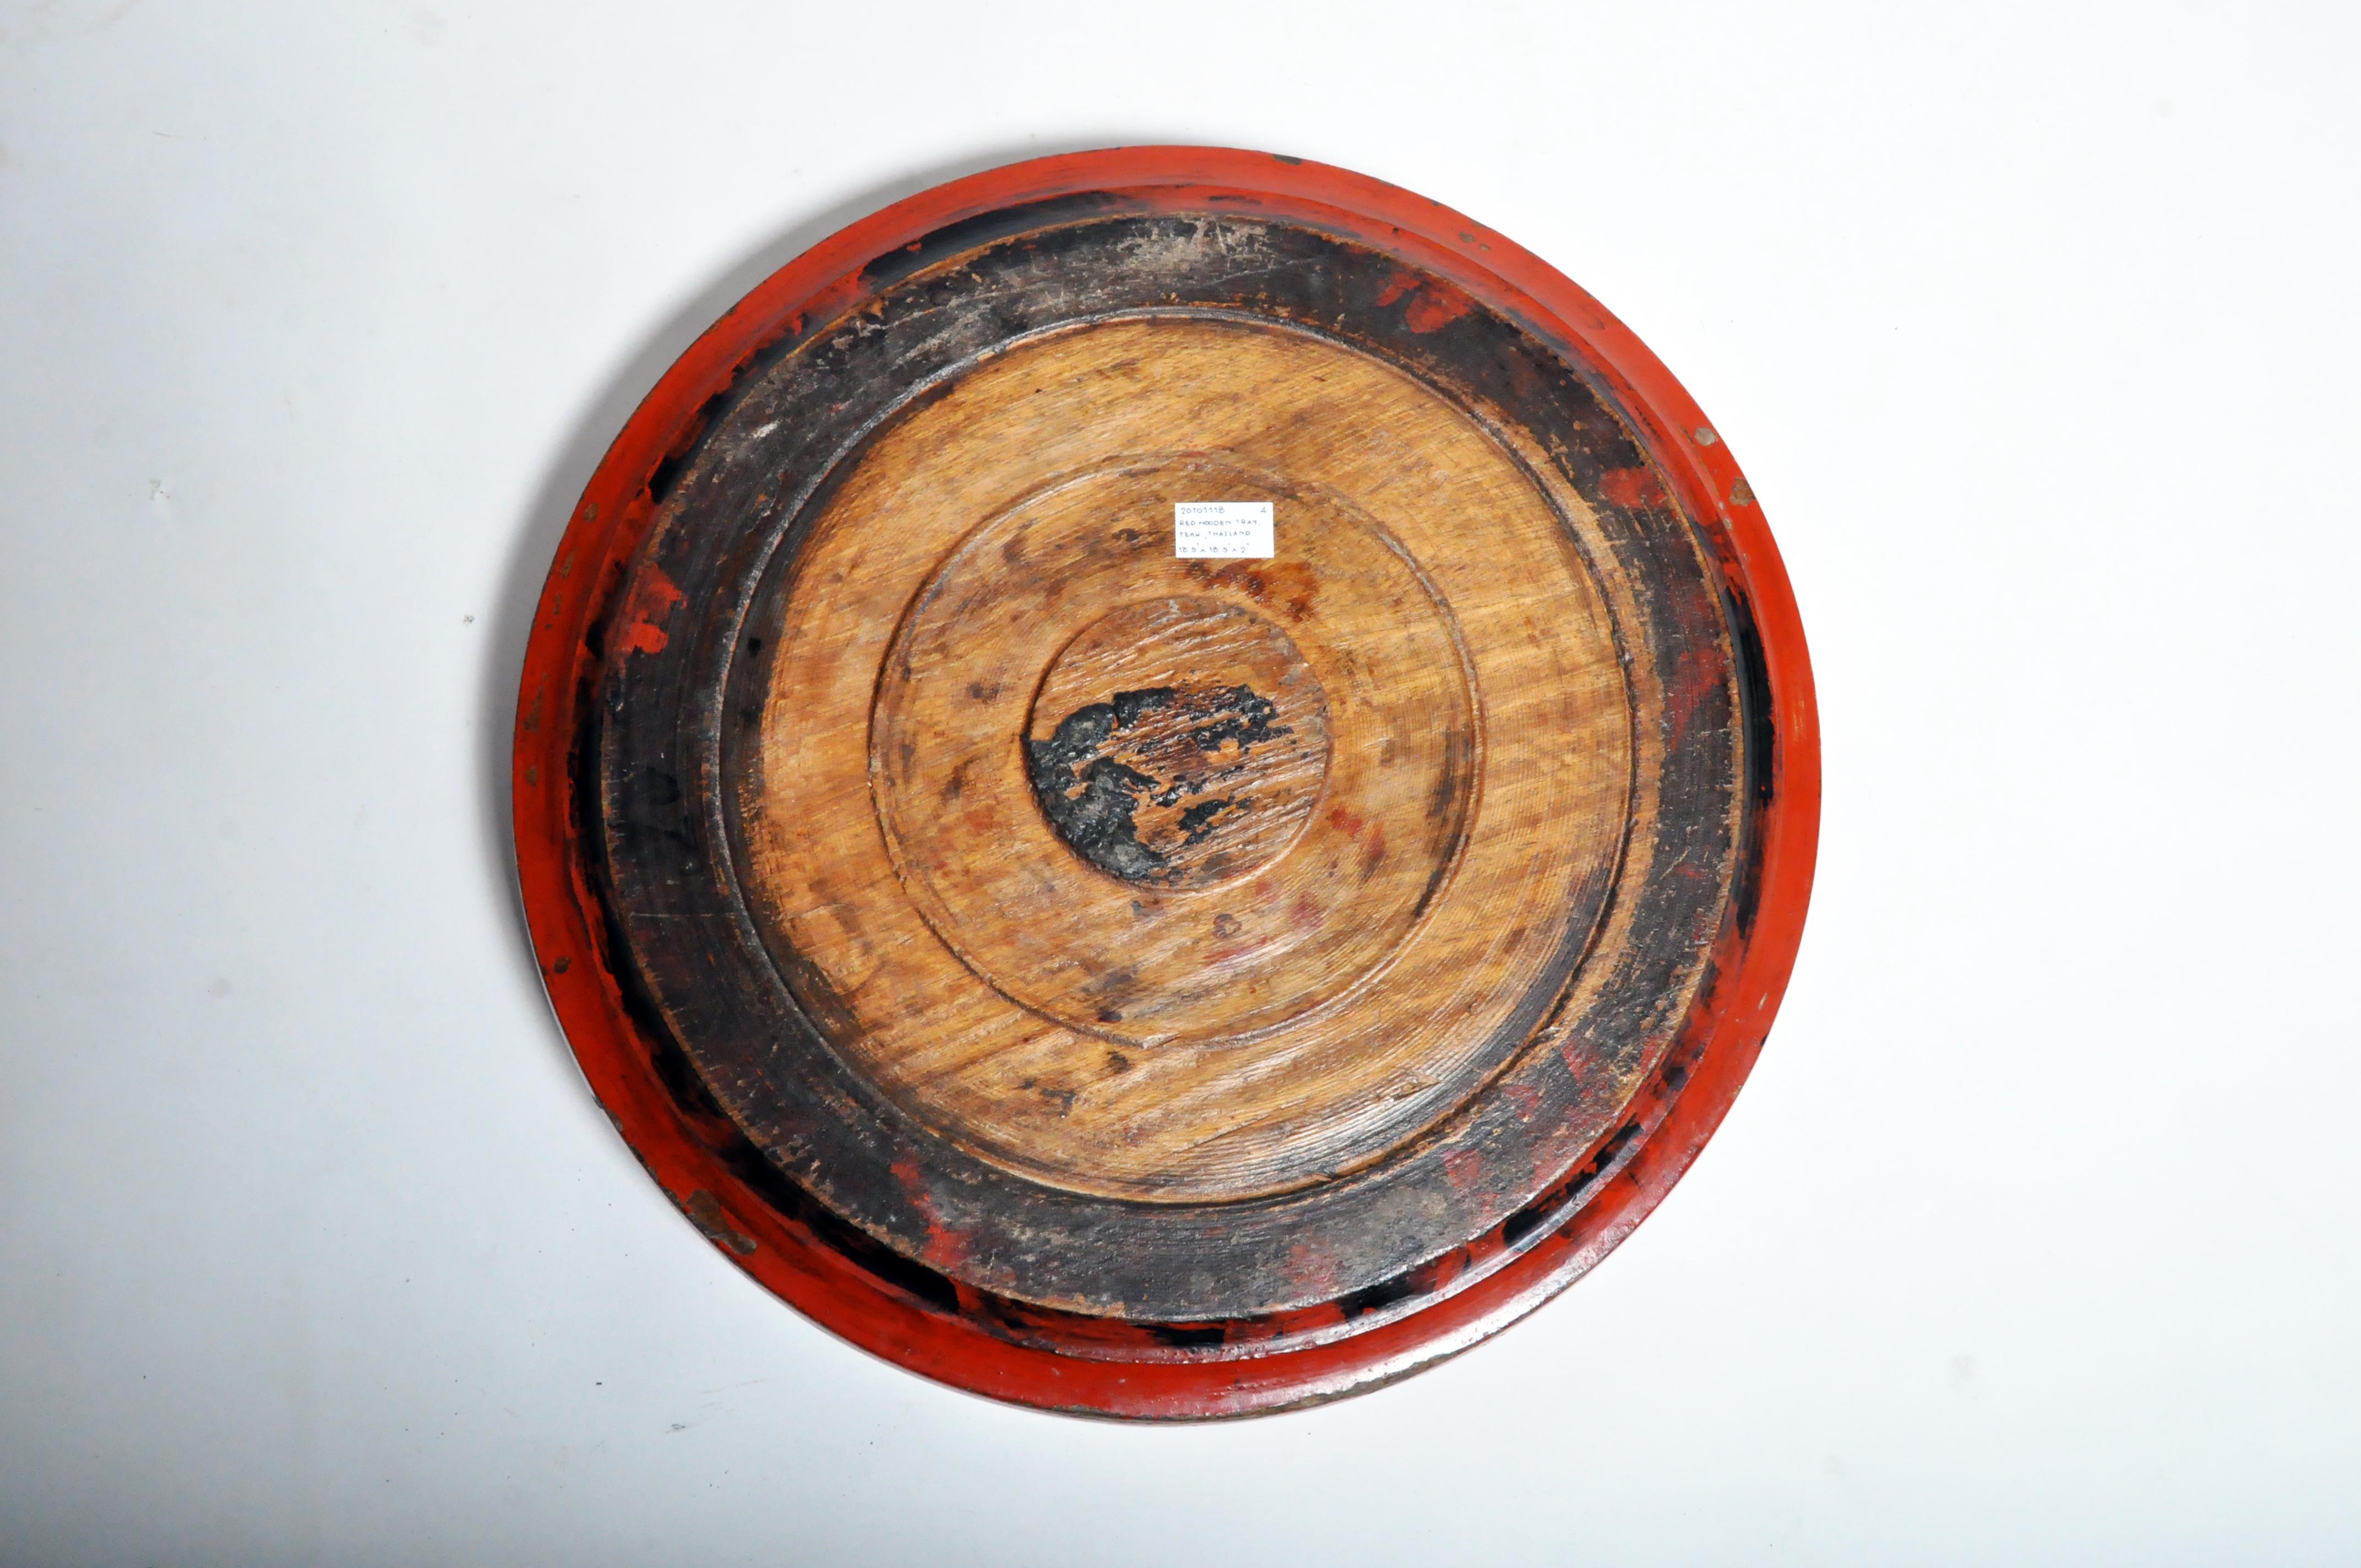 This large wooden tray was carved from a single piece of teak wood and covered in multiple layers of natural tree sap lacquer. Black lacquer was used to fill in the pores of the wood and build up a thick, protective surface. Red cinnabar lacquer